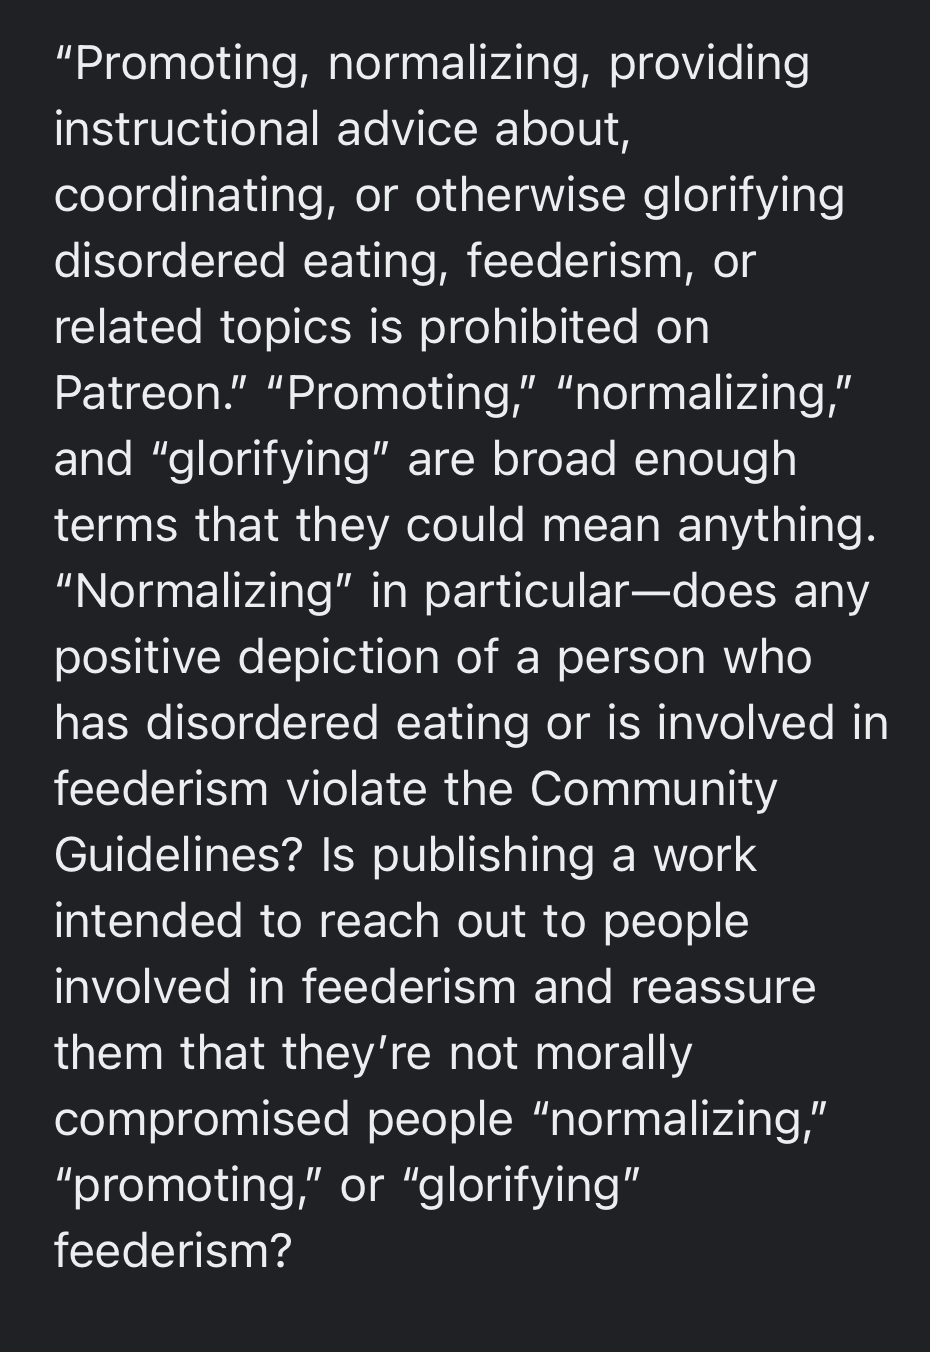 “Promoting, normalizing, providing instructional advice about, coordinating, or otherwise glorifying disordered eating, feederism, or related topics is prohibited on Patreon.” “Promoting,” “normalizing,” and “glorifying” are broad enough terms that they could mean anything. “Normalizing” in particular—does any positive depiction of a person who has disordered eating or is involved in feederism violate the Community Guidelines? Is publishing a work intended to reach out to people involved in feederism and reassure them that they’re not morally compromised people “normalizing,” “promoting,” or “glorifying” feederism?